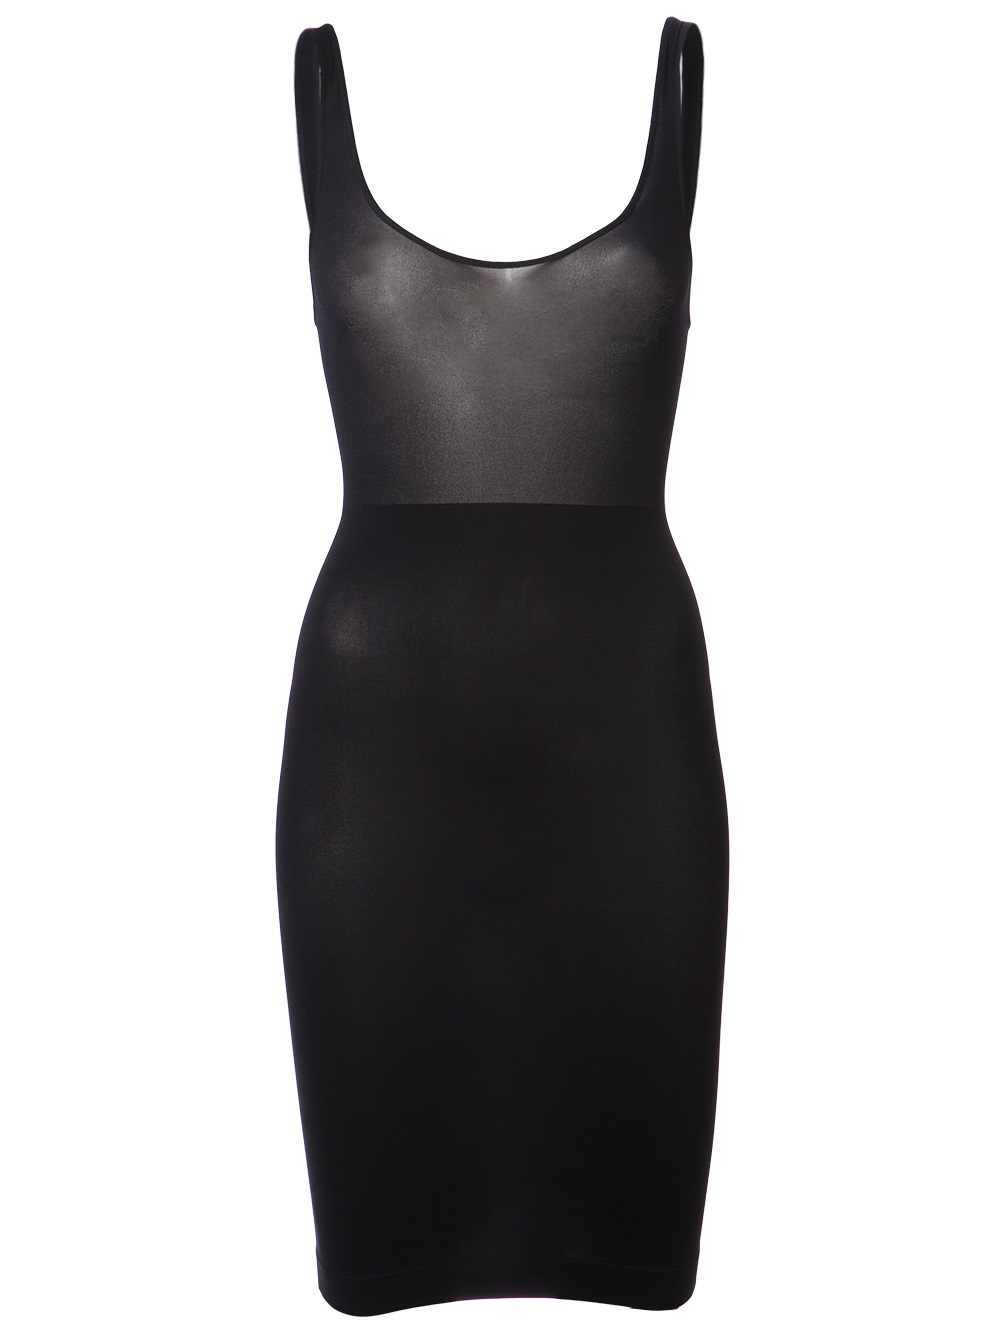 Lyst - Wolford 'individual Nature' Forming Dress in Black